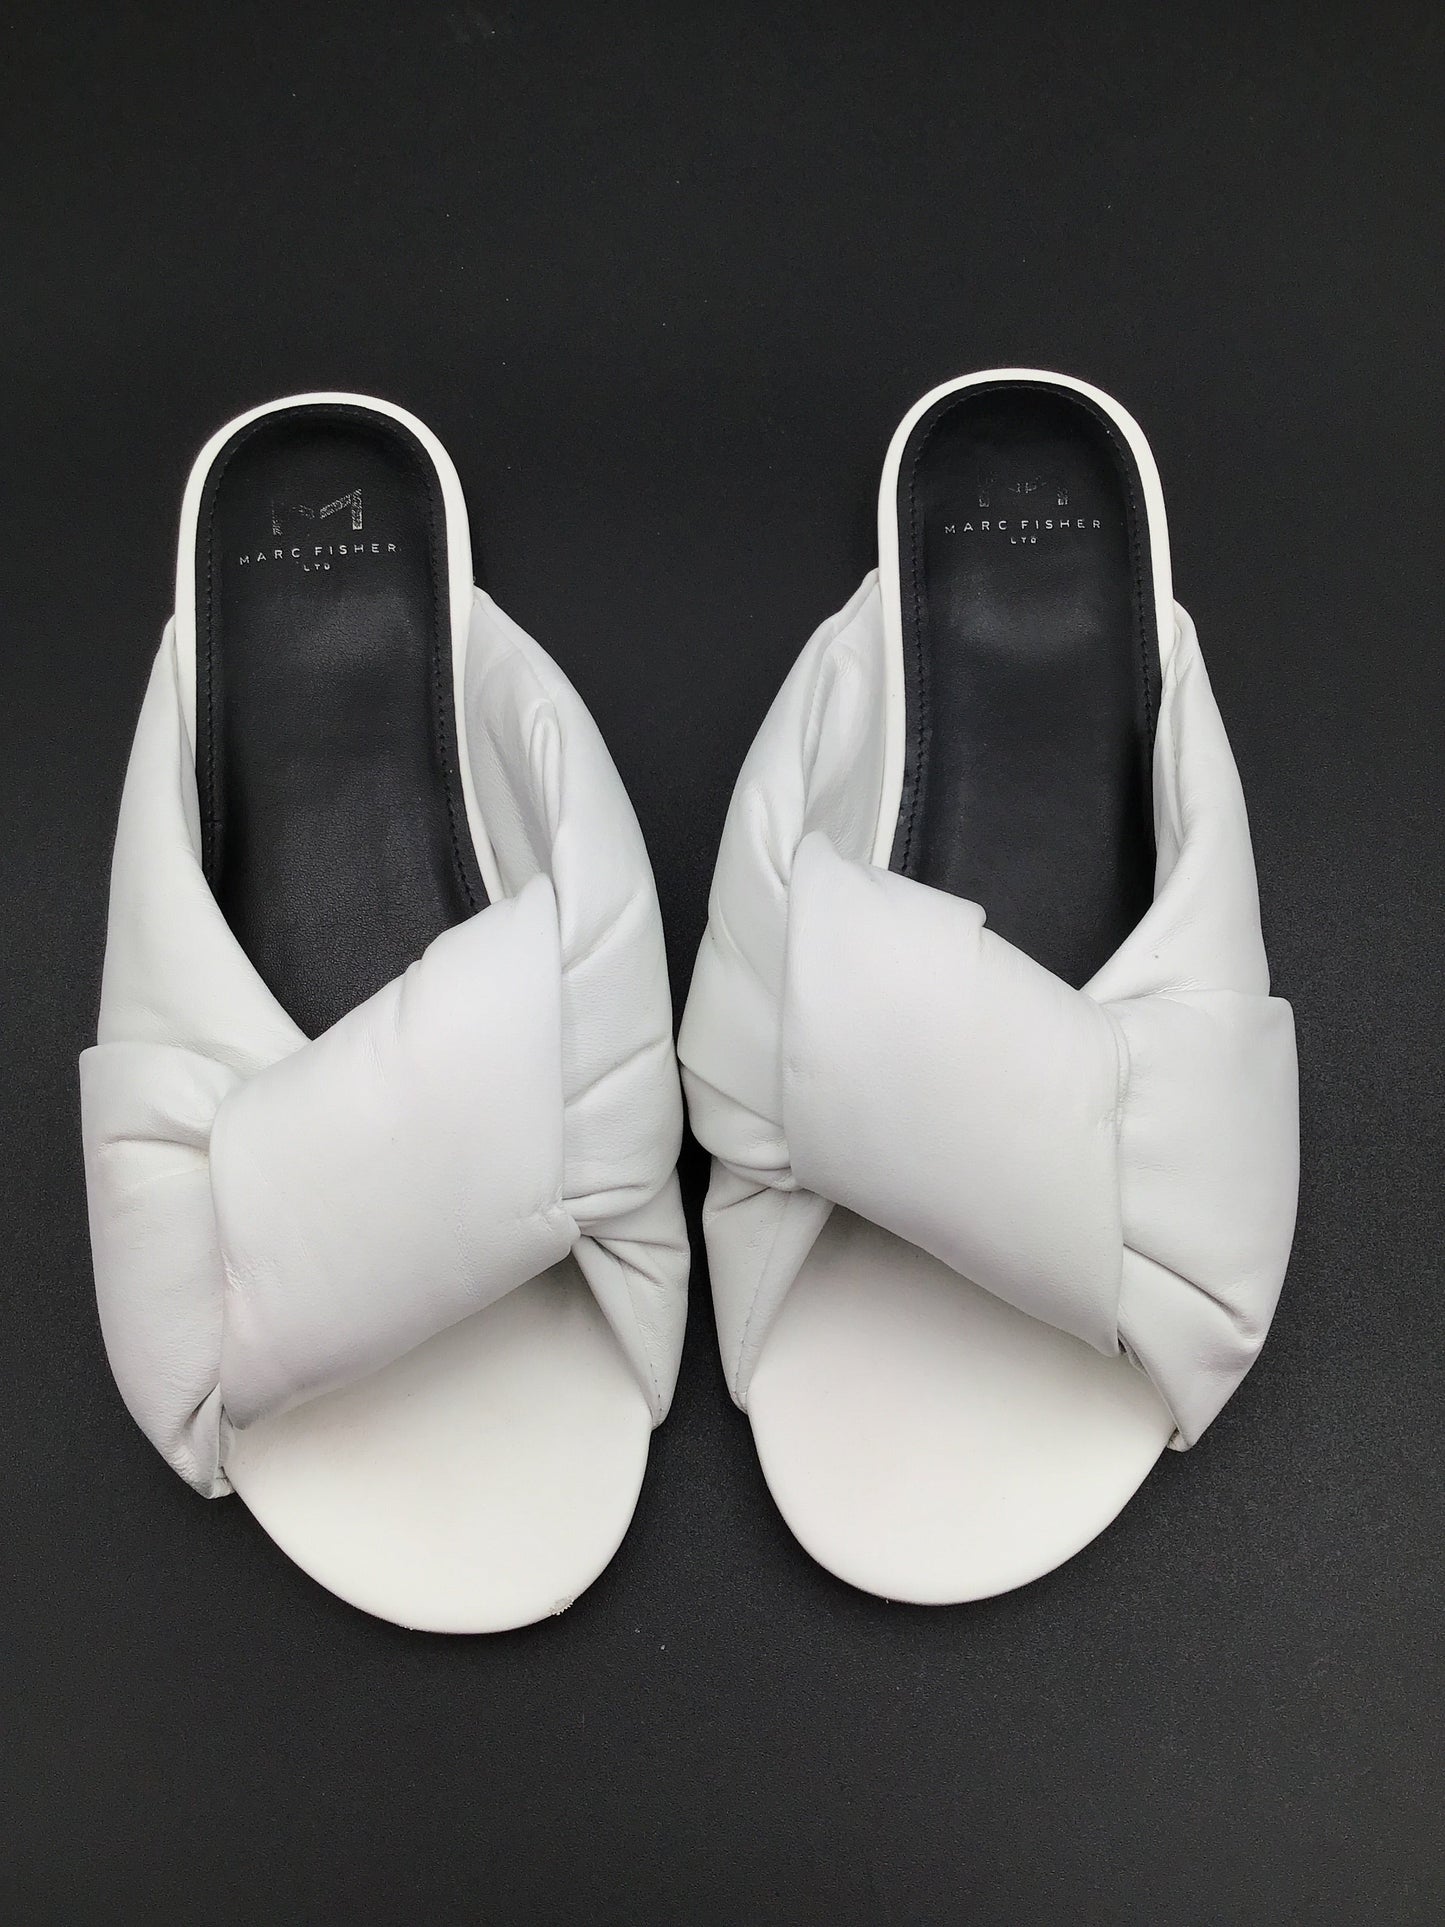 White Sandals Flats Marc Fisher, Size 9